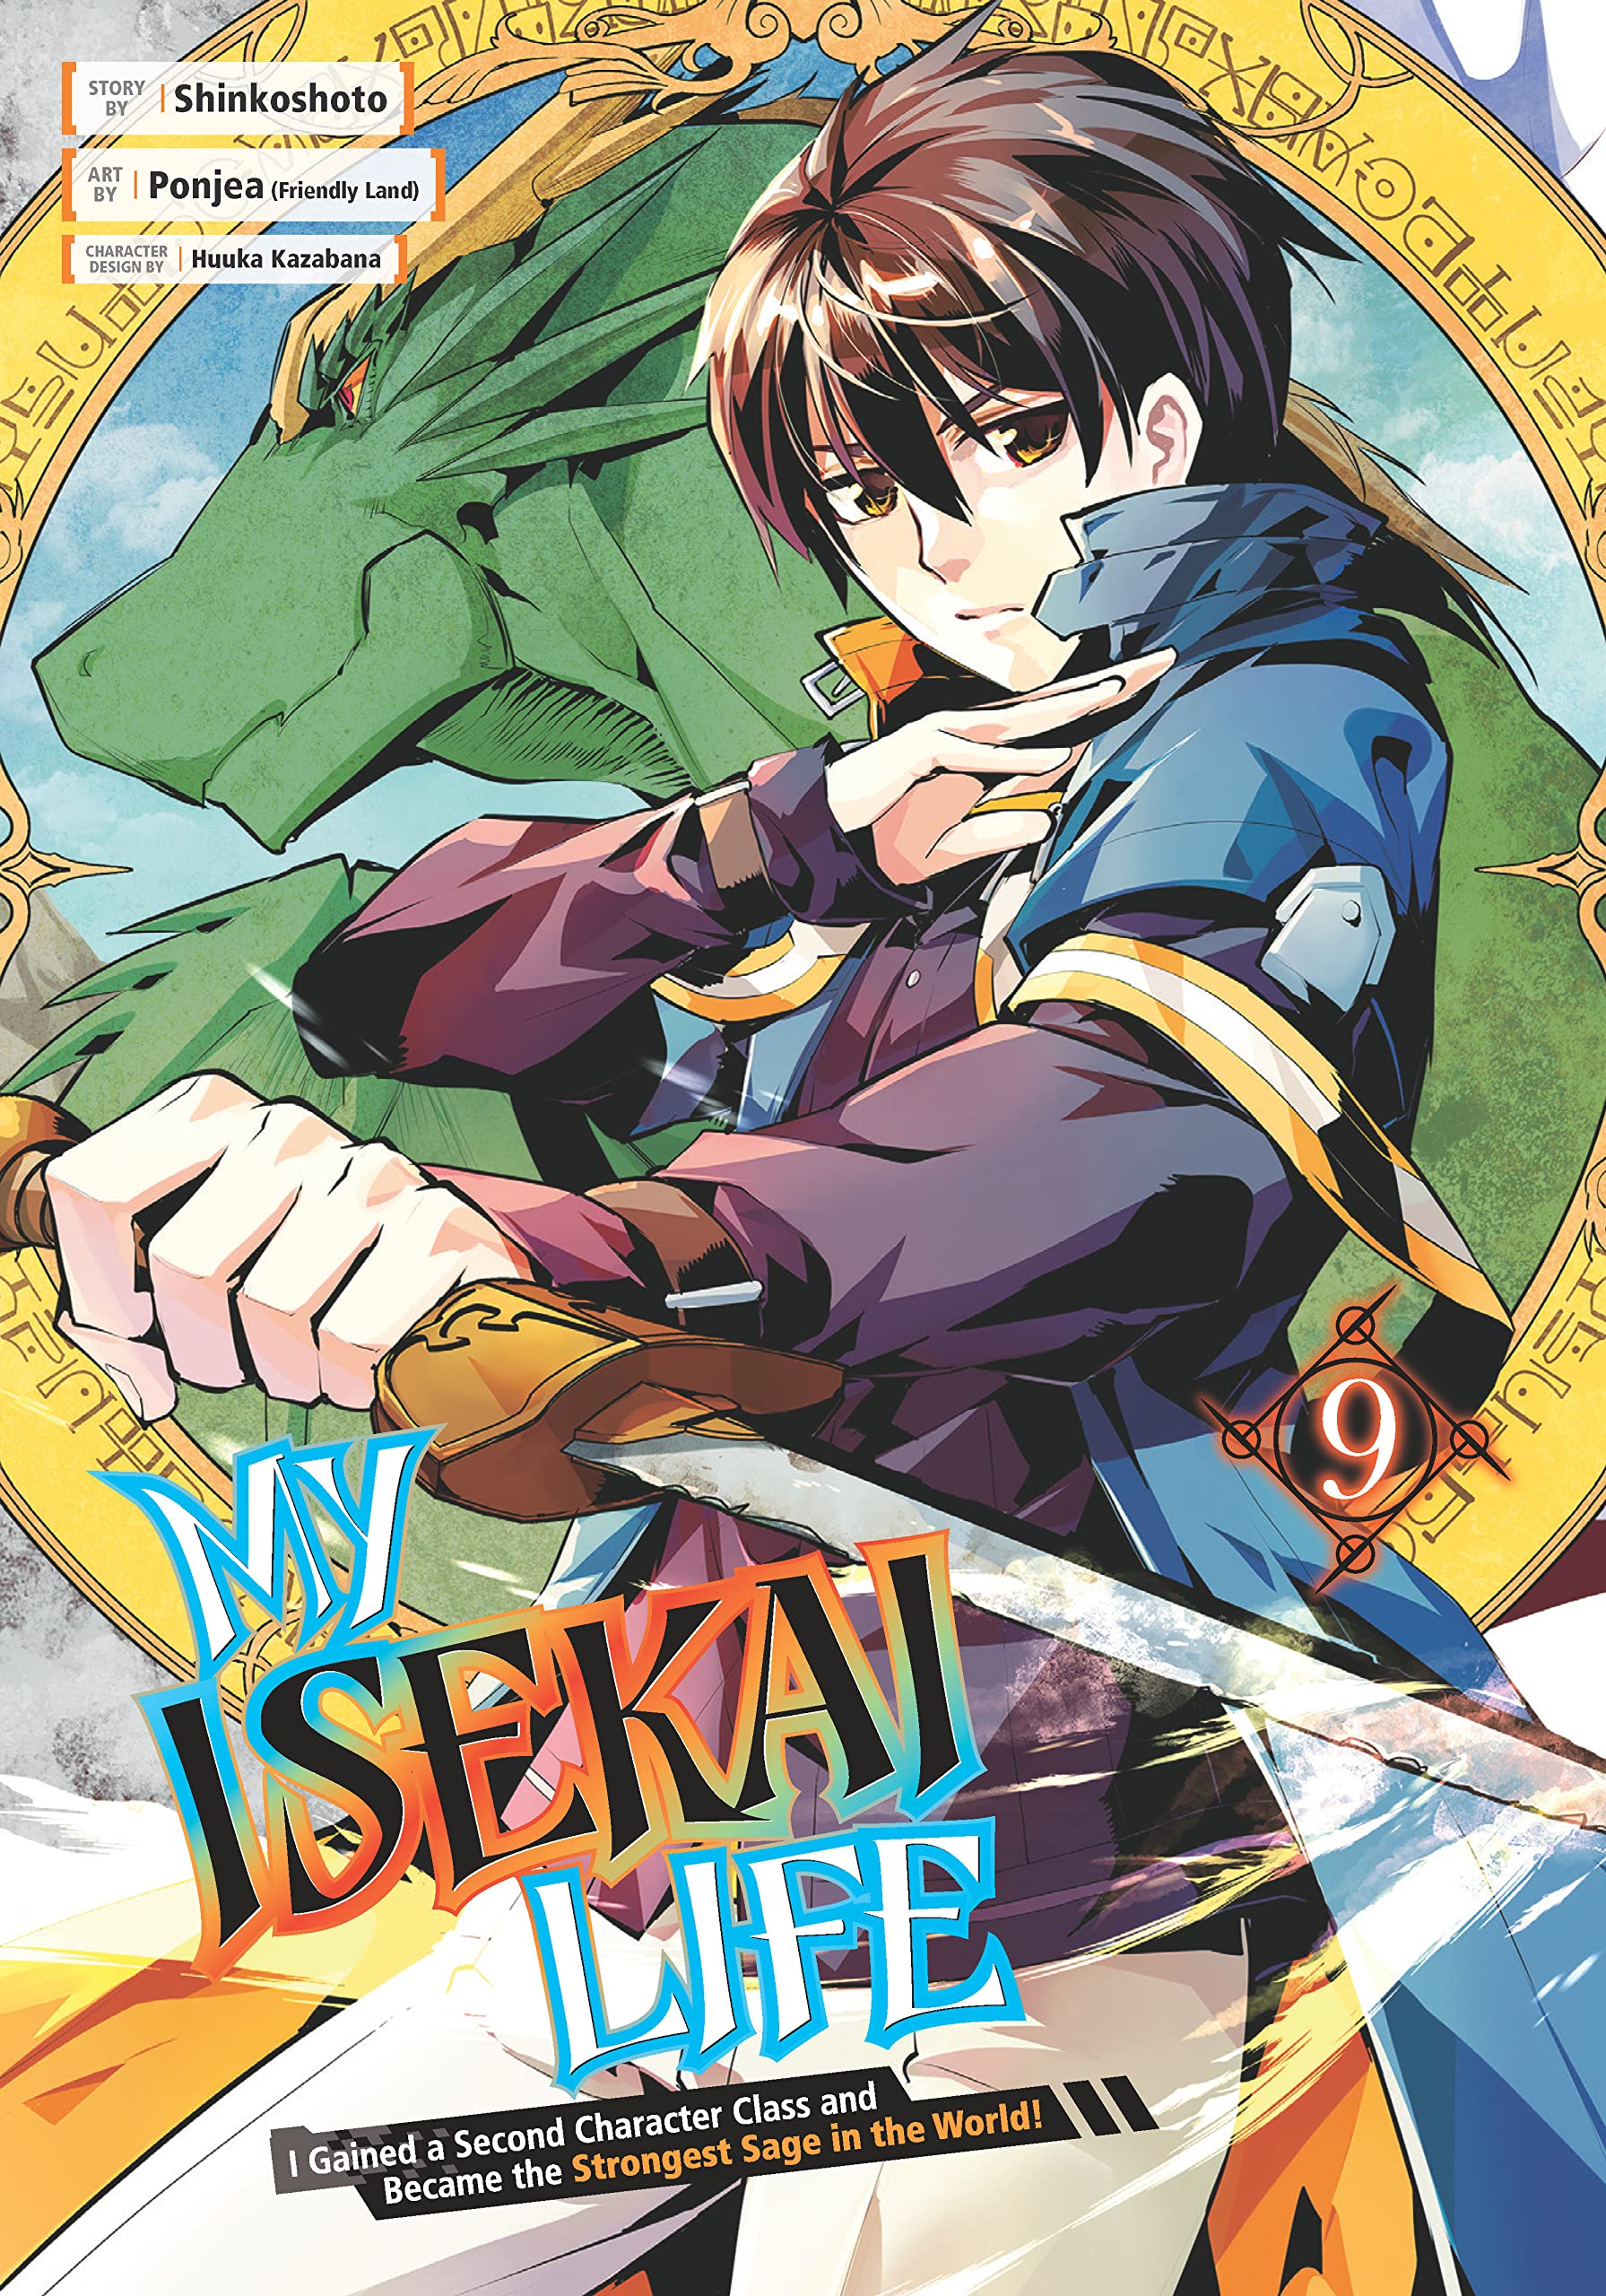 My Isekai Life: I Gained a Second Character Class and Became the Strongest Sage in the World! Vol. 09